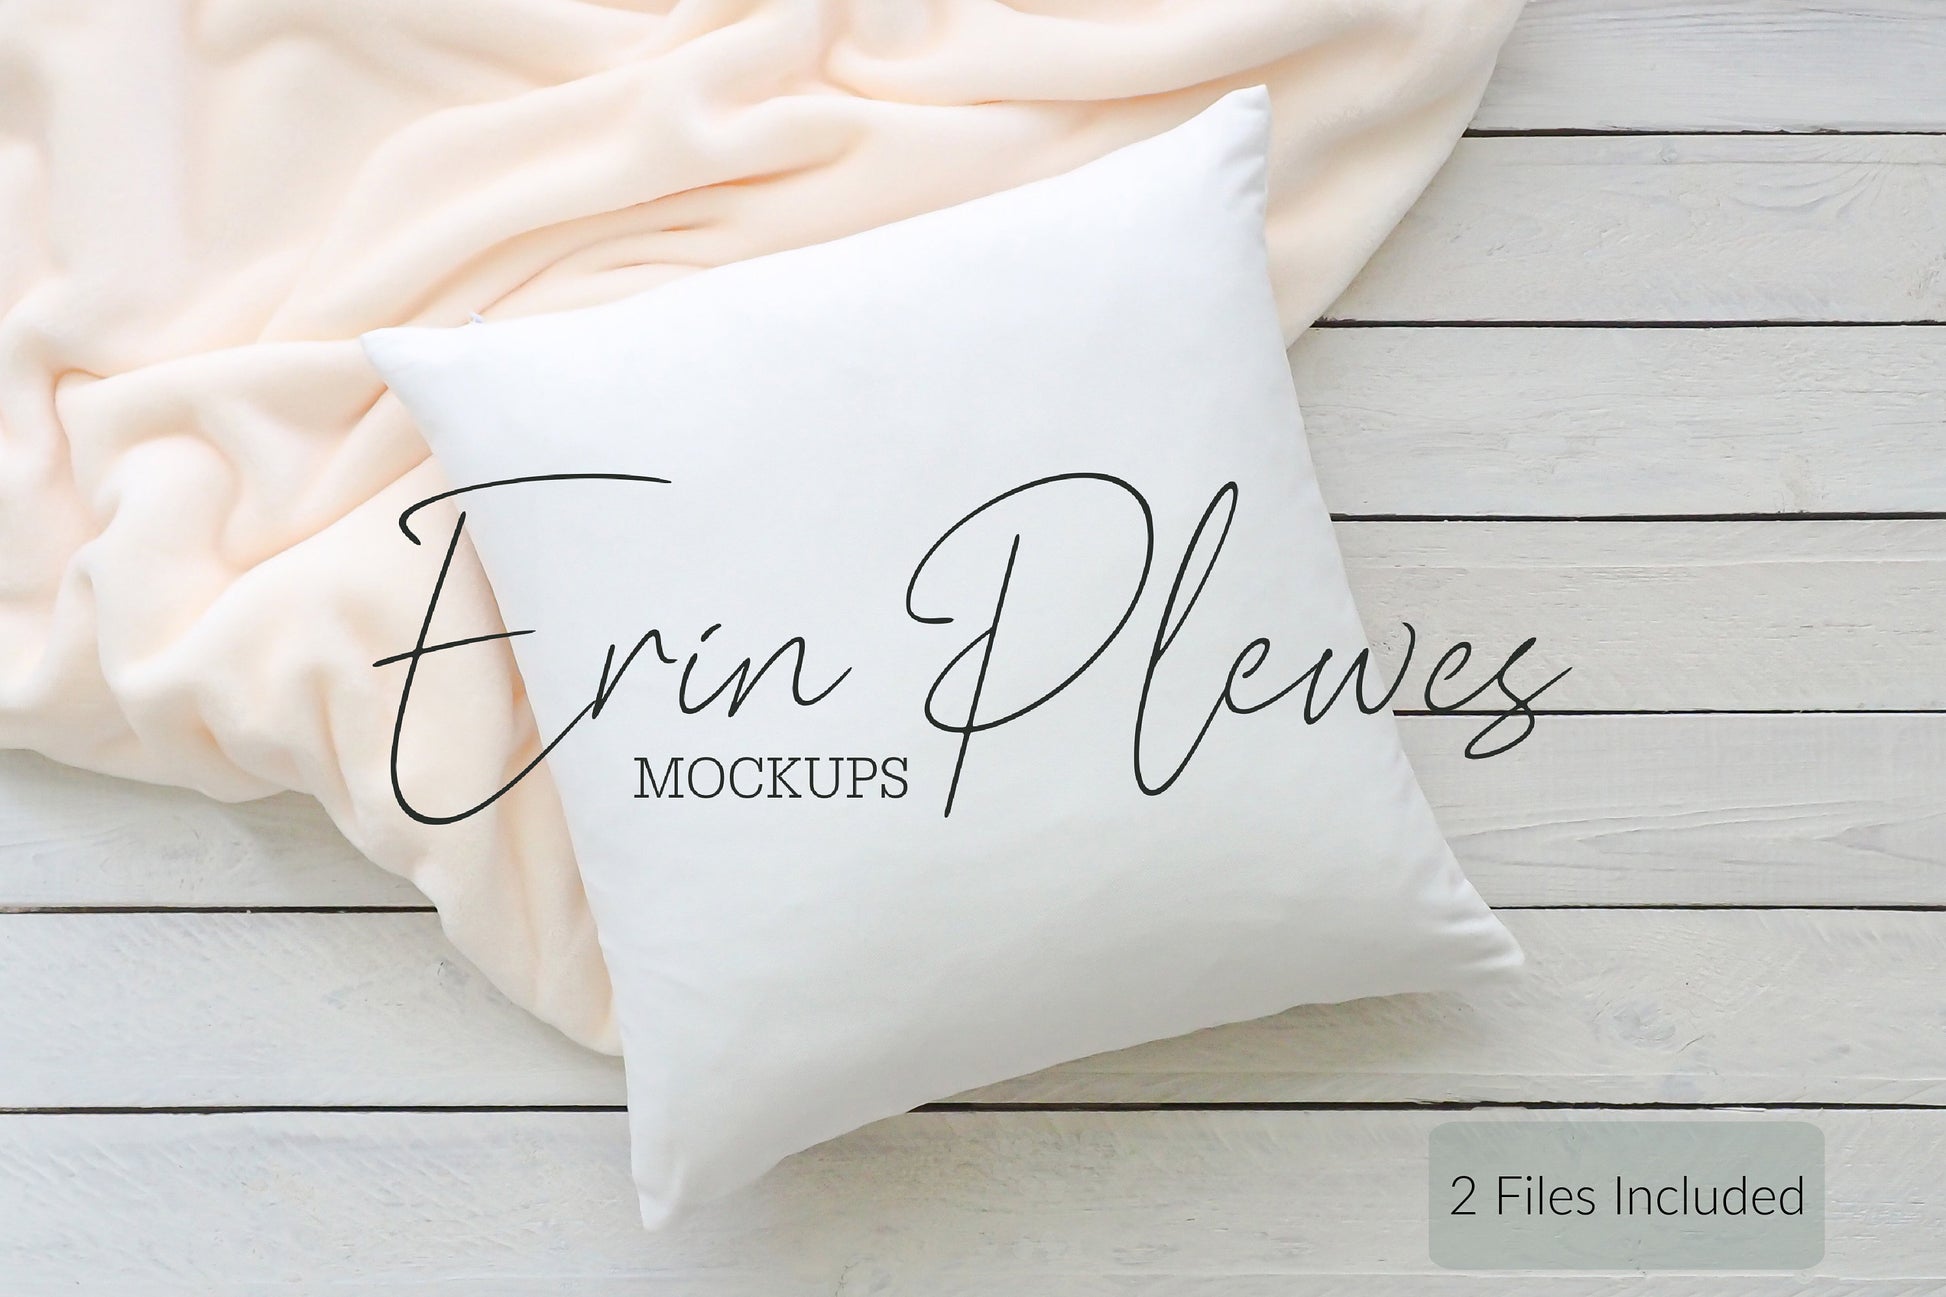 Pillow Case Mockup, Pillow mock-up with cream blanket, Minimalist cushion lifestyle stock photo, Jpeg Instant Digital Download